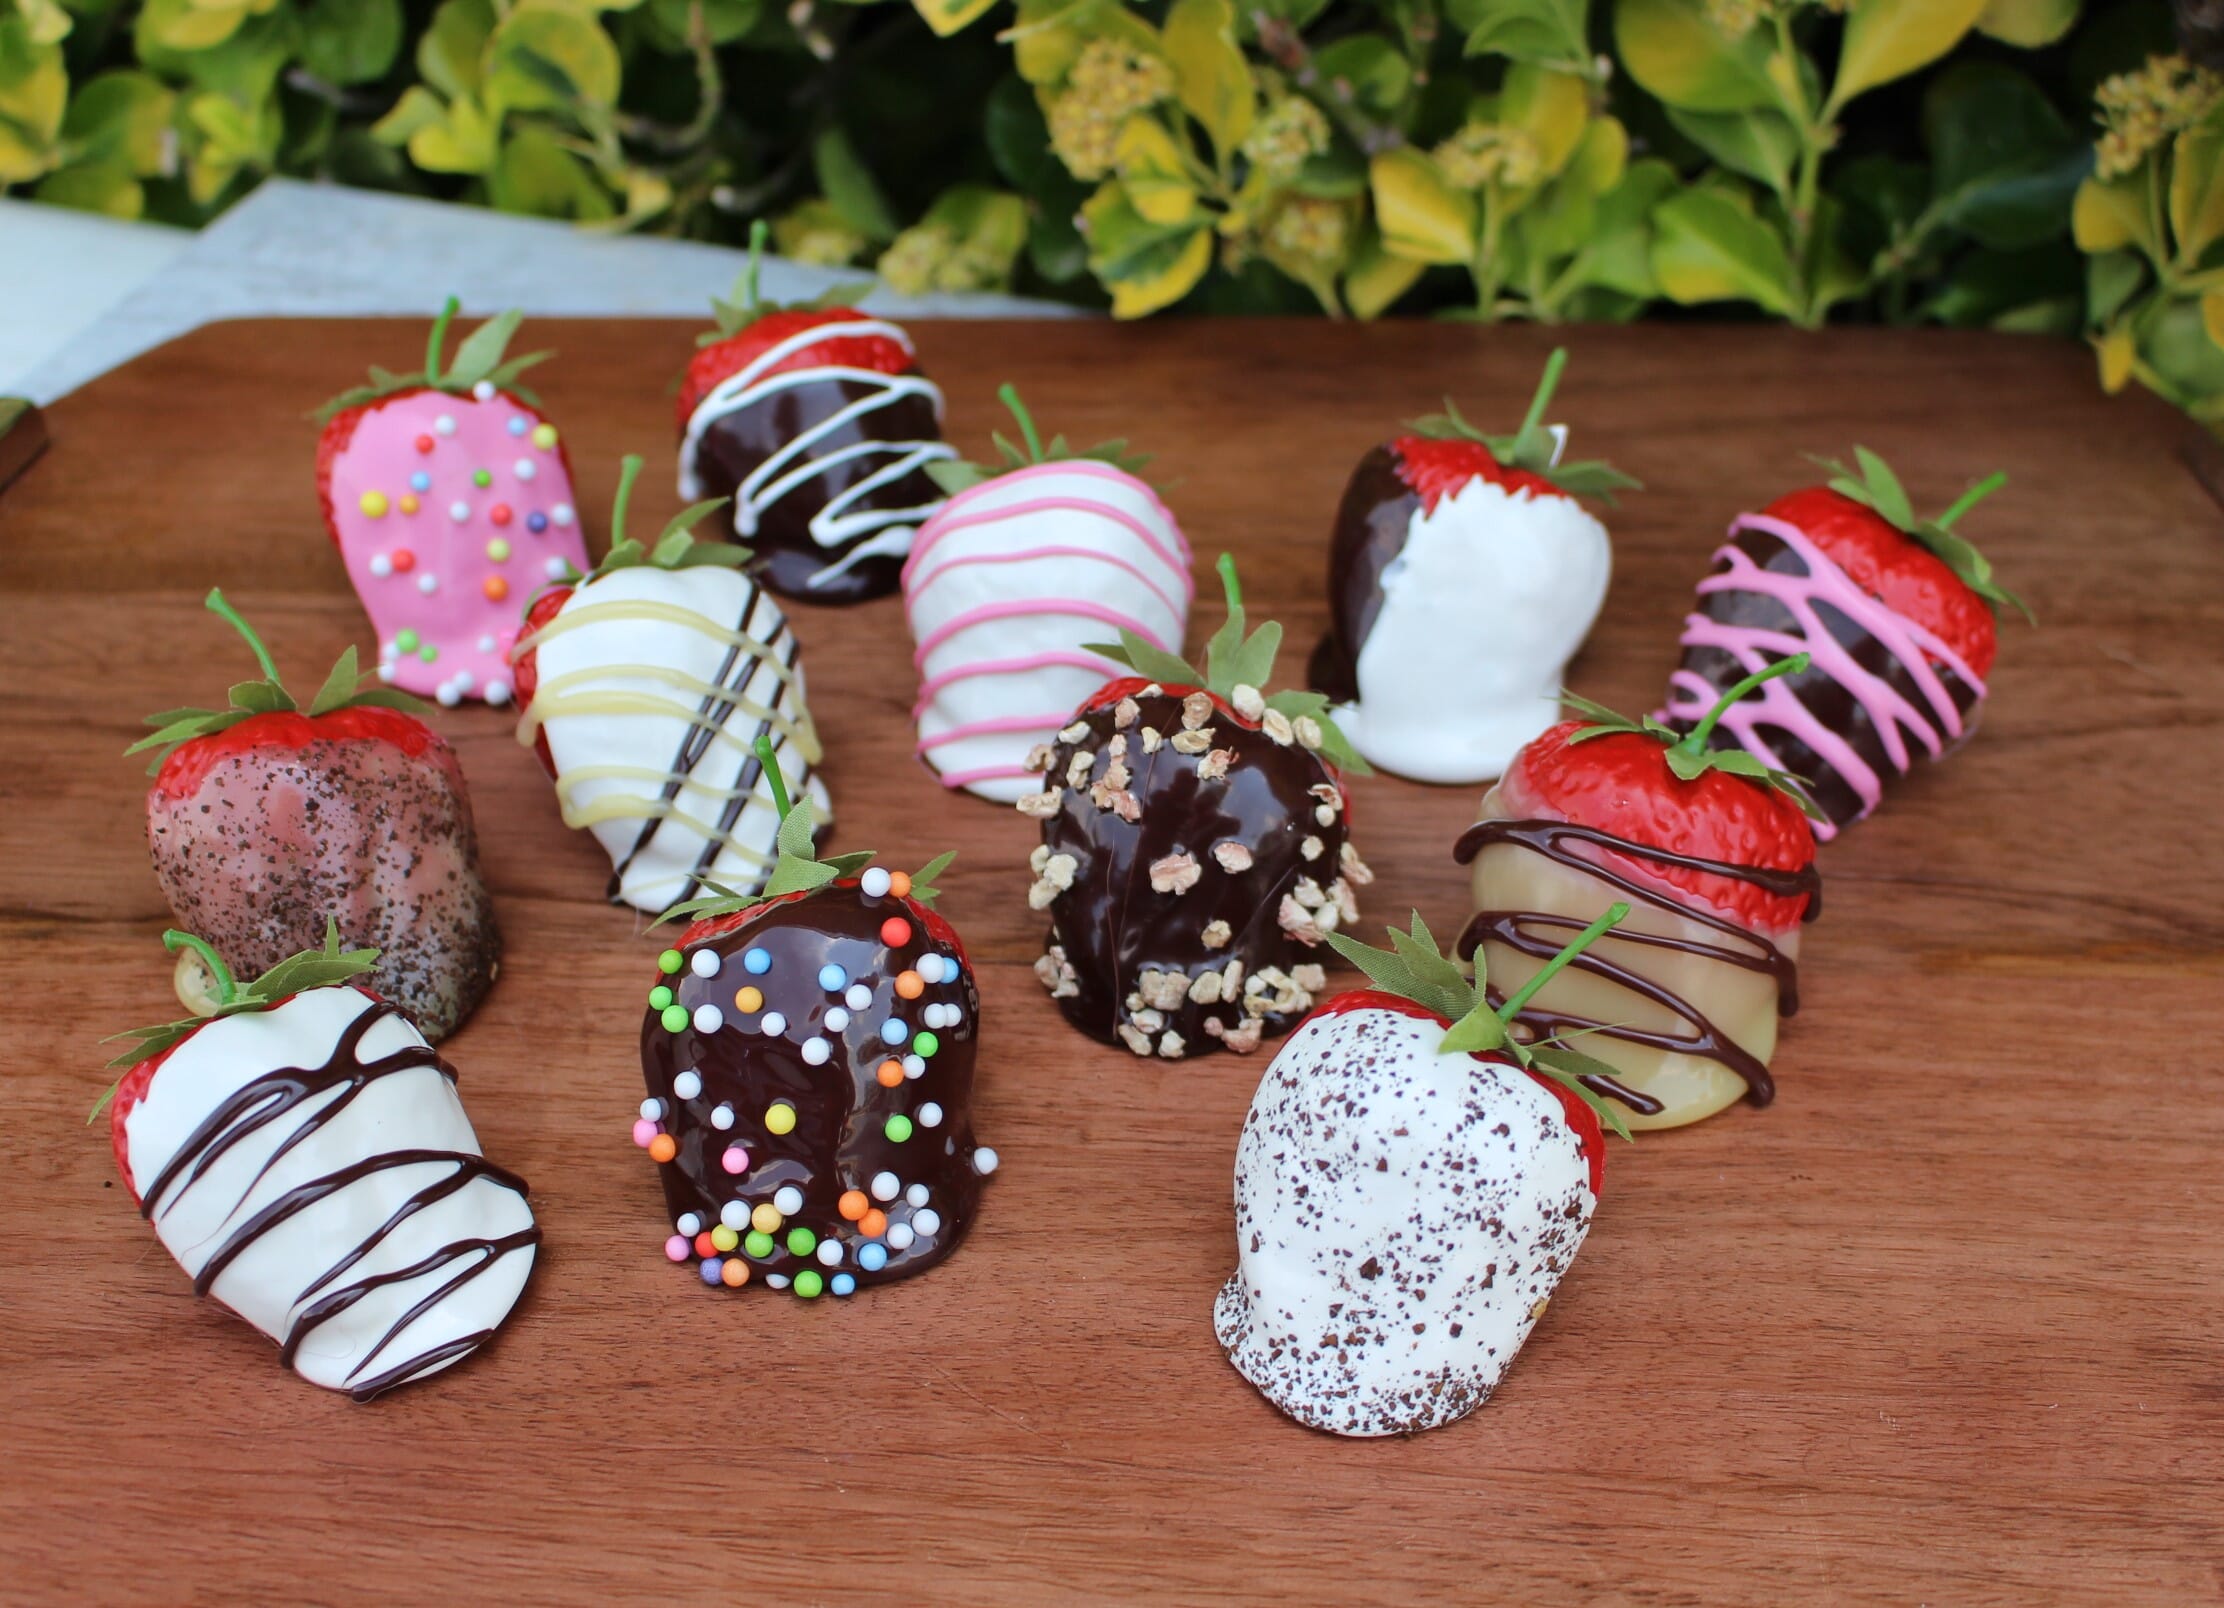 Deluxe Strawberries Dipped in Chocolate and Decorated